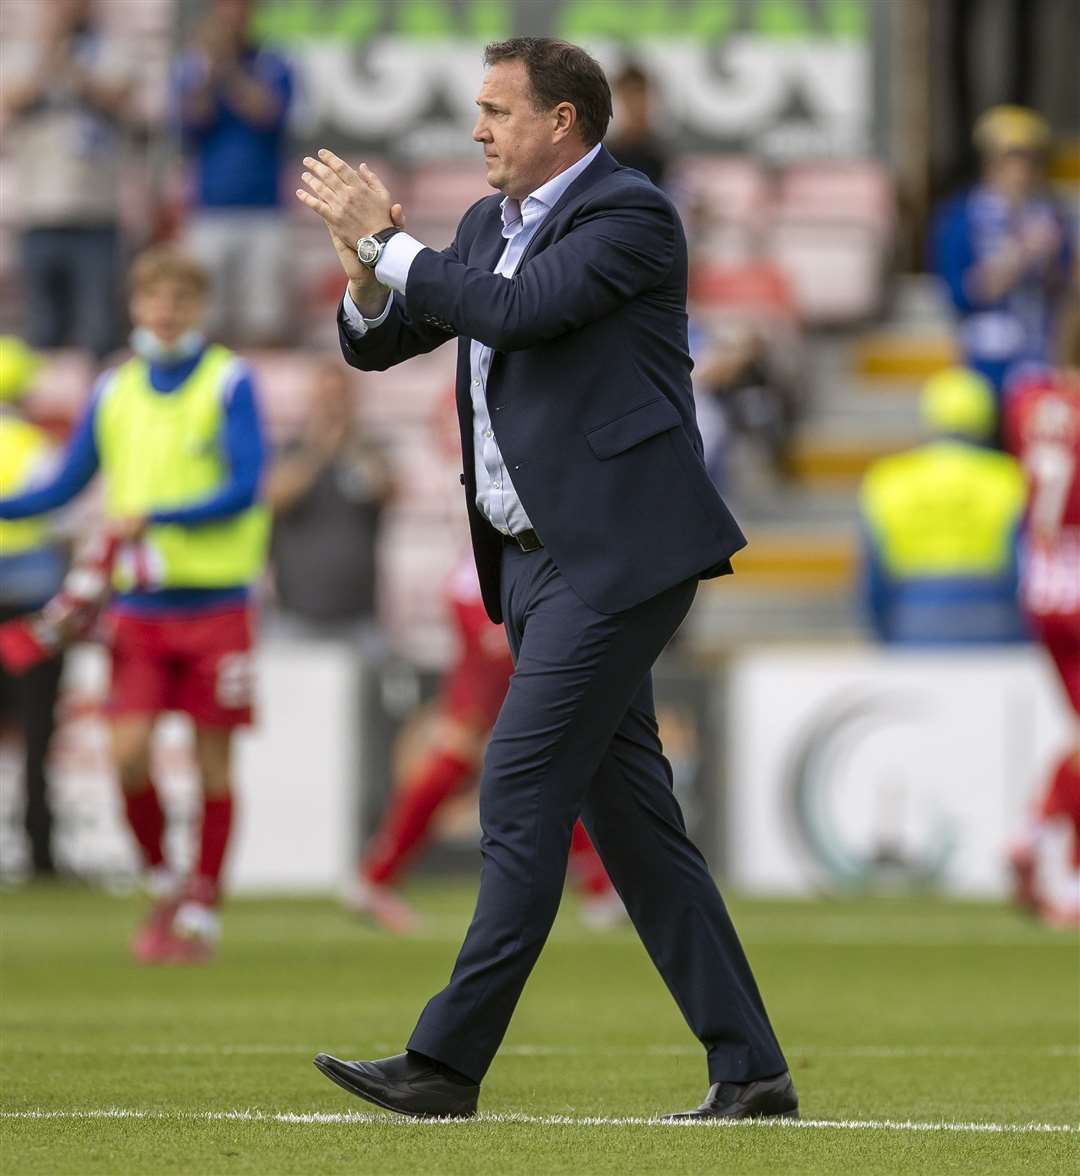 Picture - Ken Macpherson, Inverness. Ross County(0) v St.Johnstone(0). 31.07.21. Ross County manager Malky Mackay applauds the home fans.